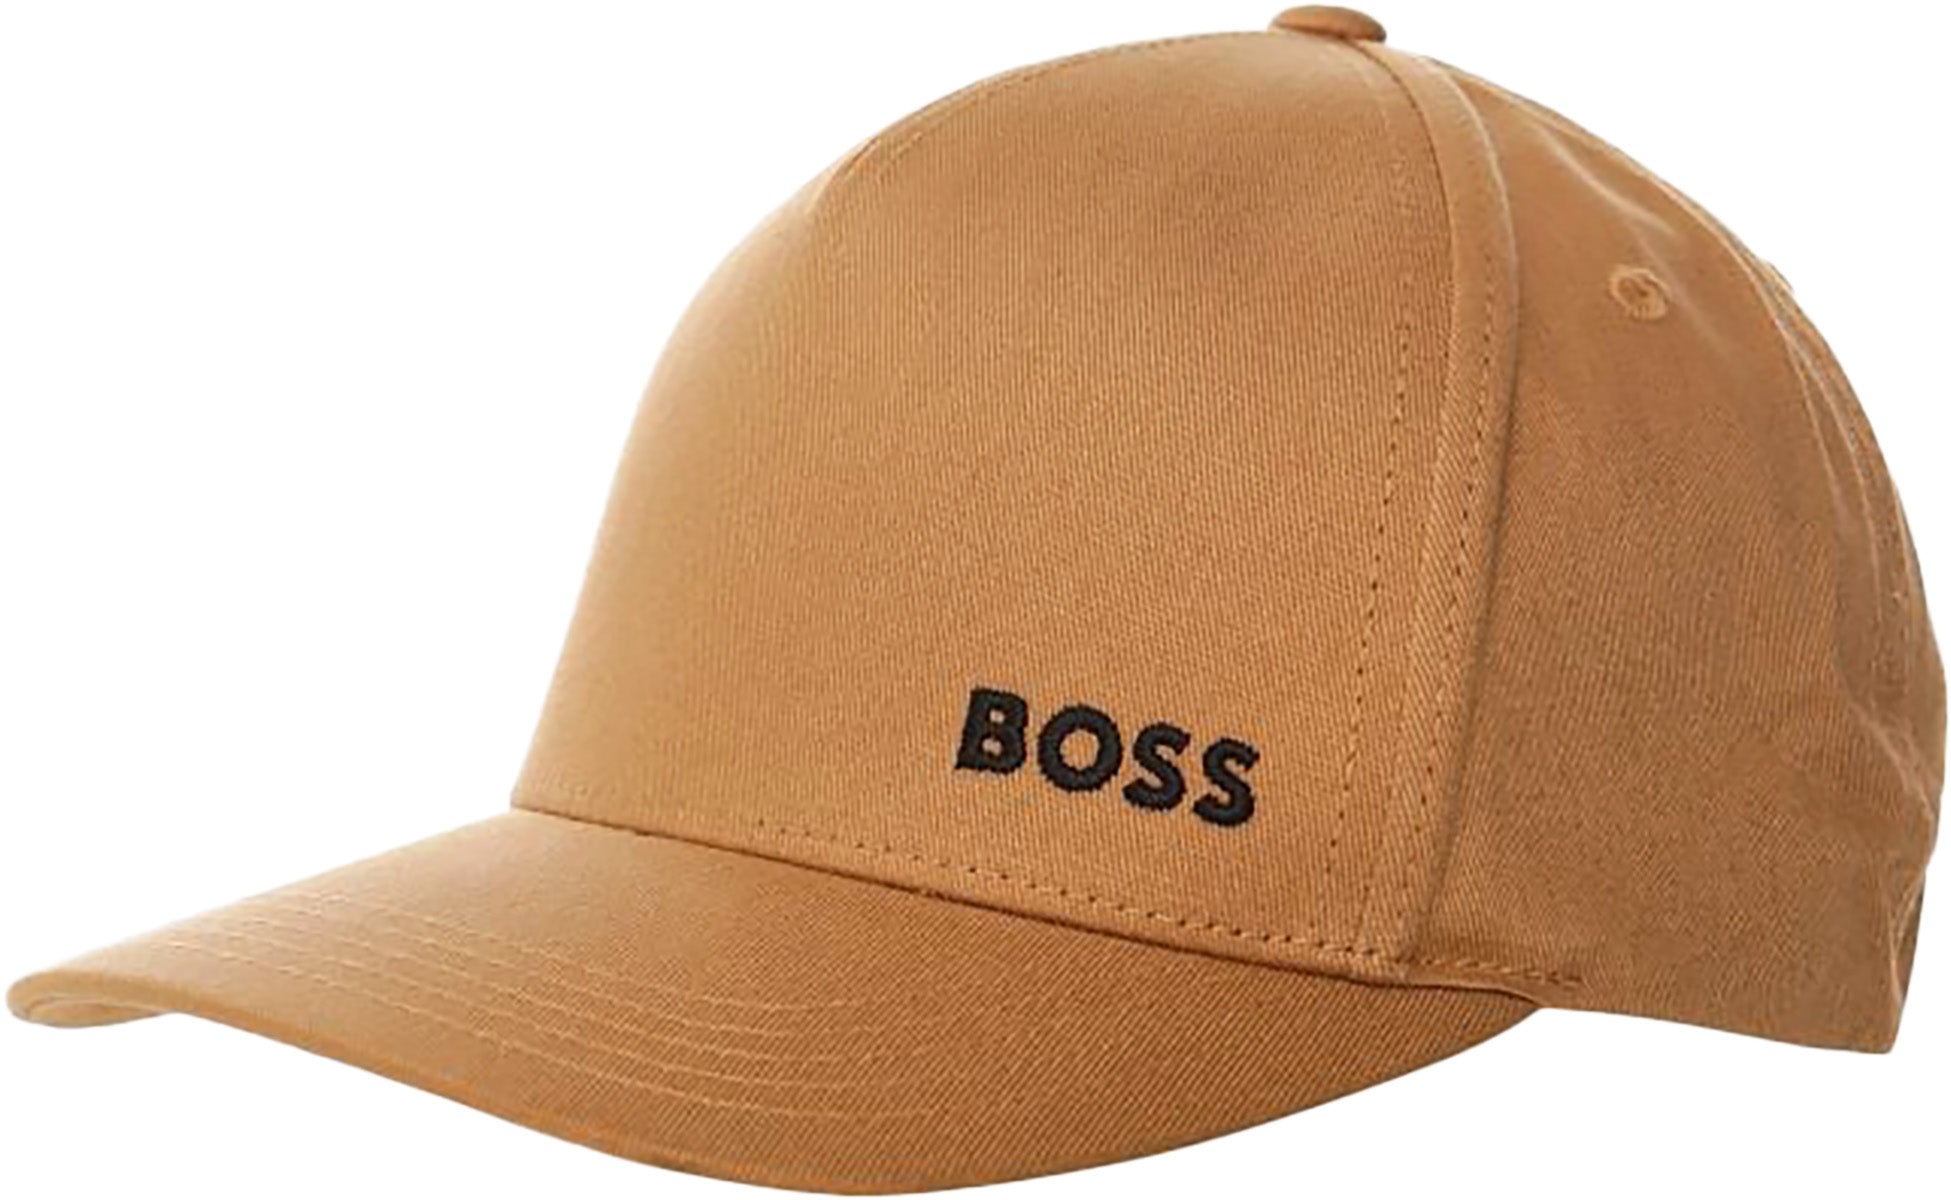 Boss Sevile Iconic In Beige | Casual – | Cap Hugo Cotton 4feetshoes Boss Hat Woven